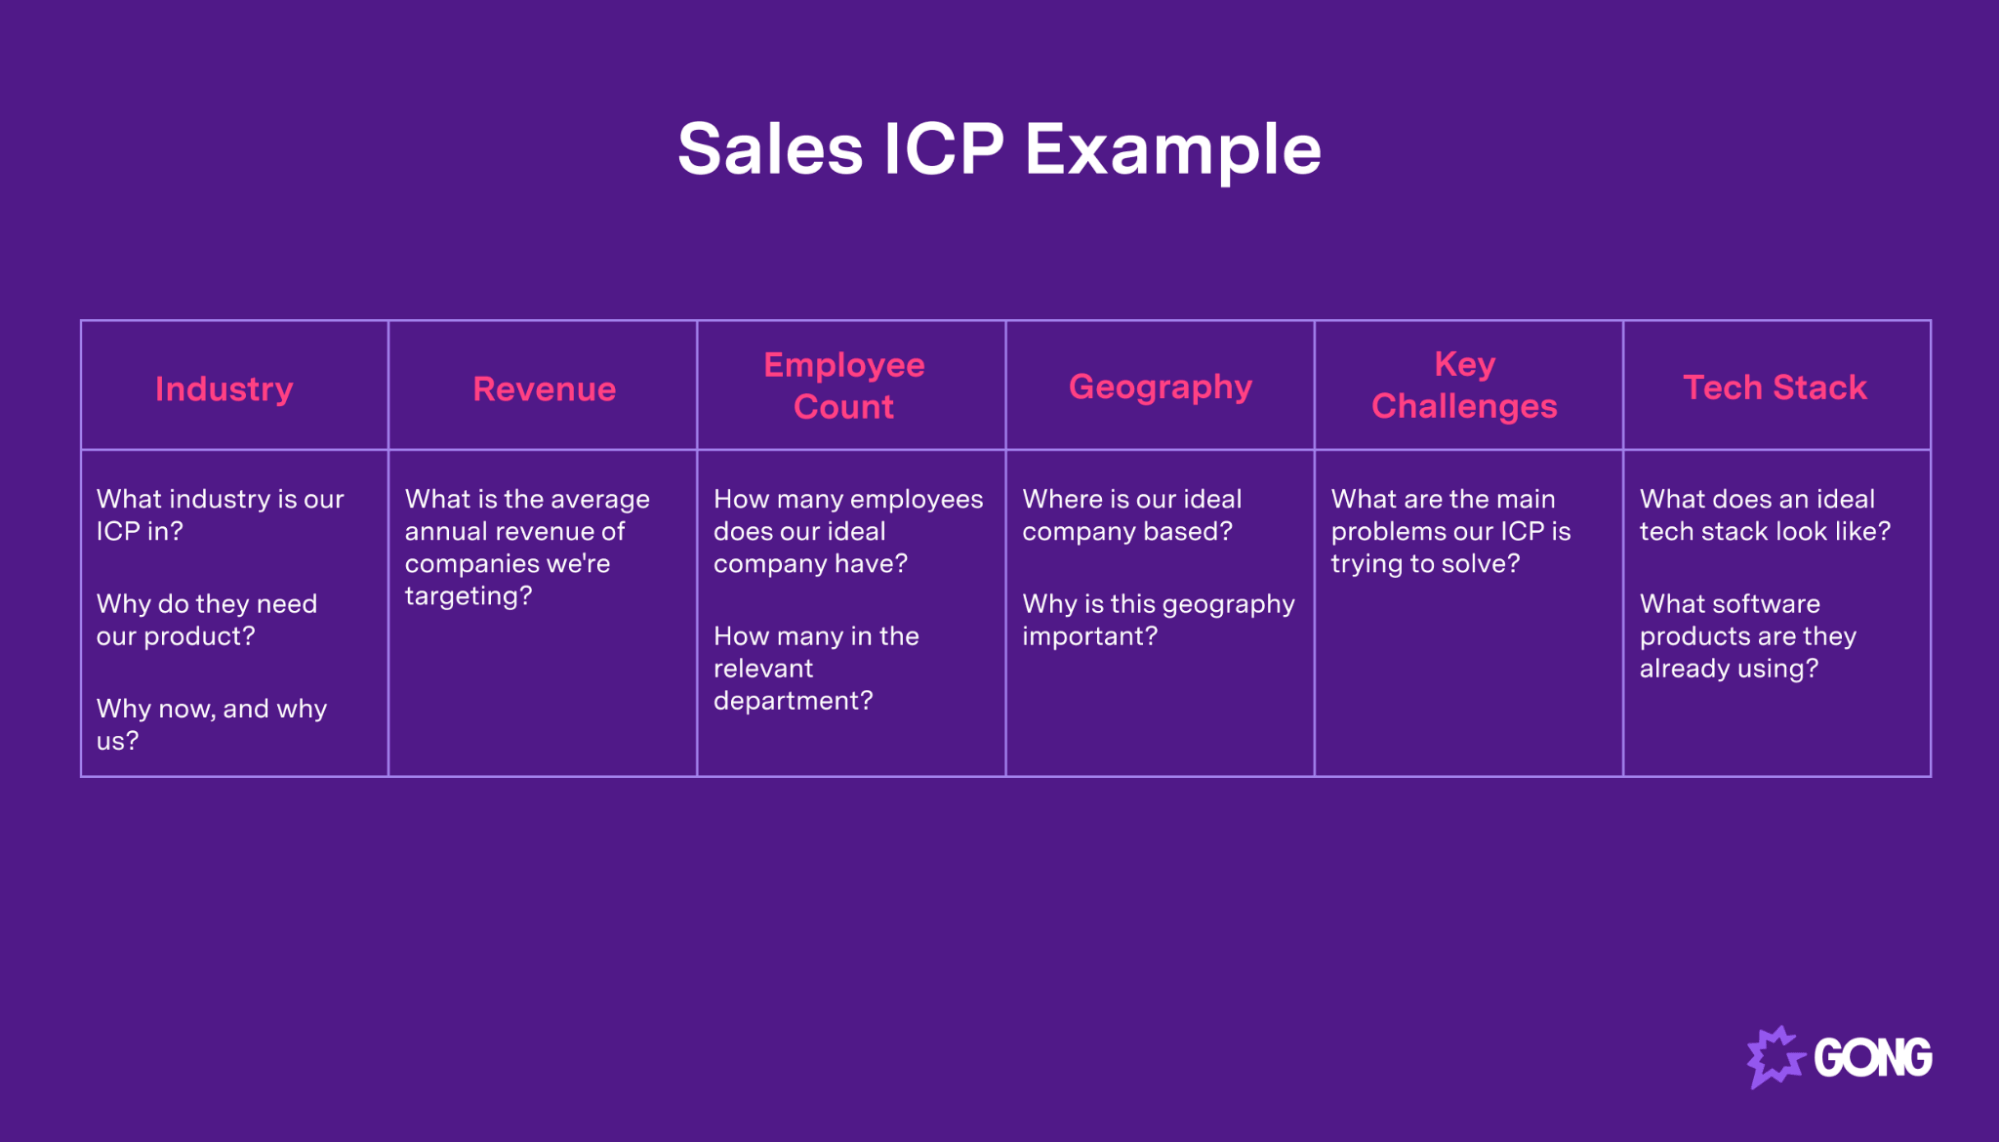 An example image of a Sales ICP